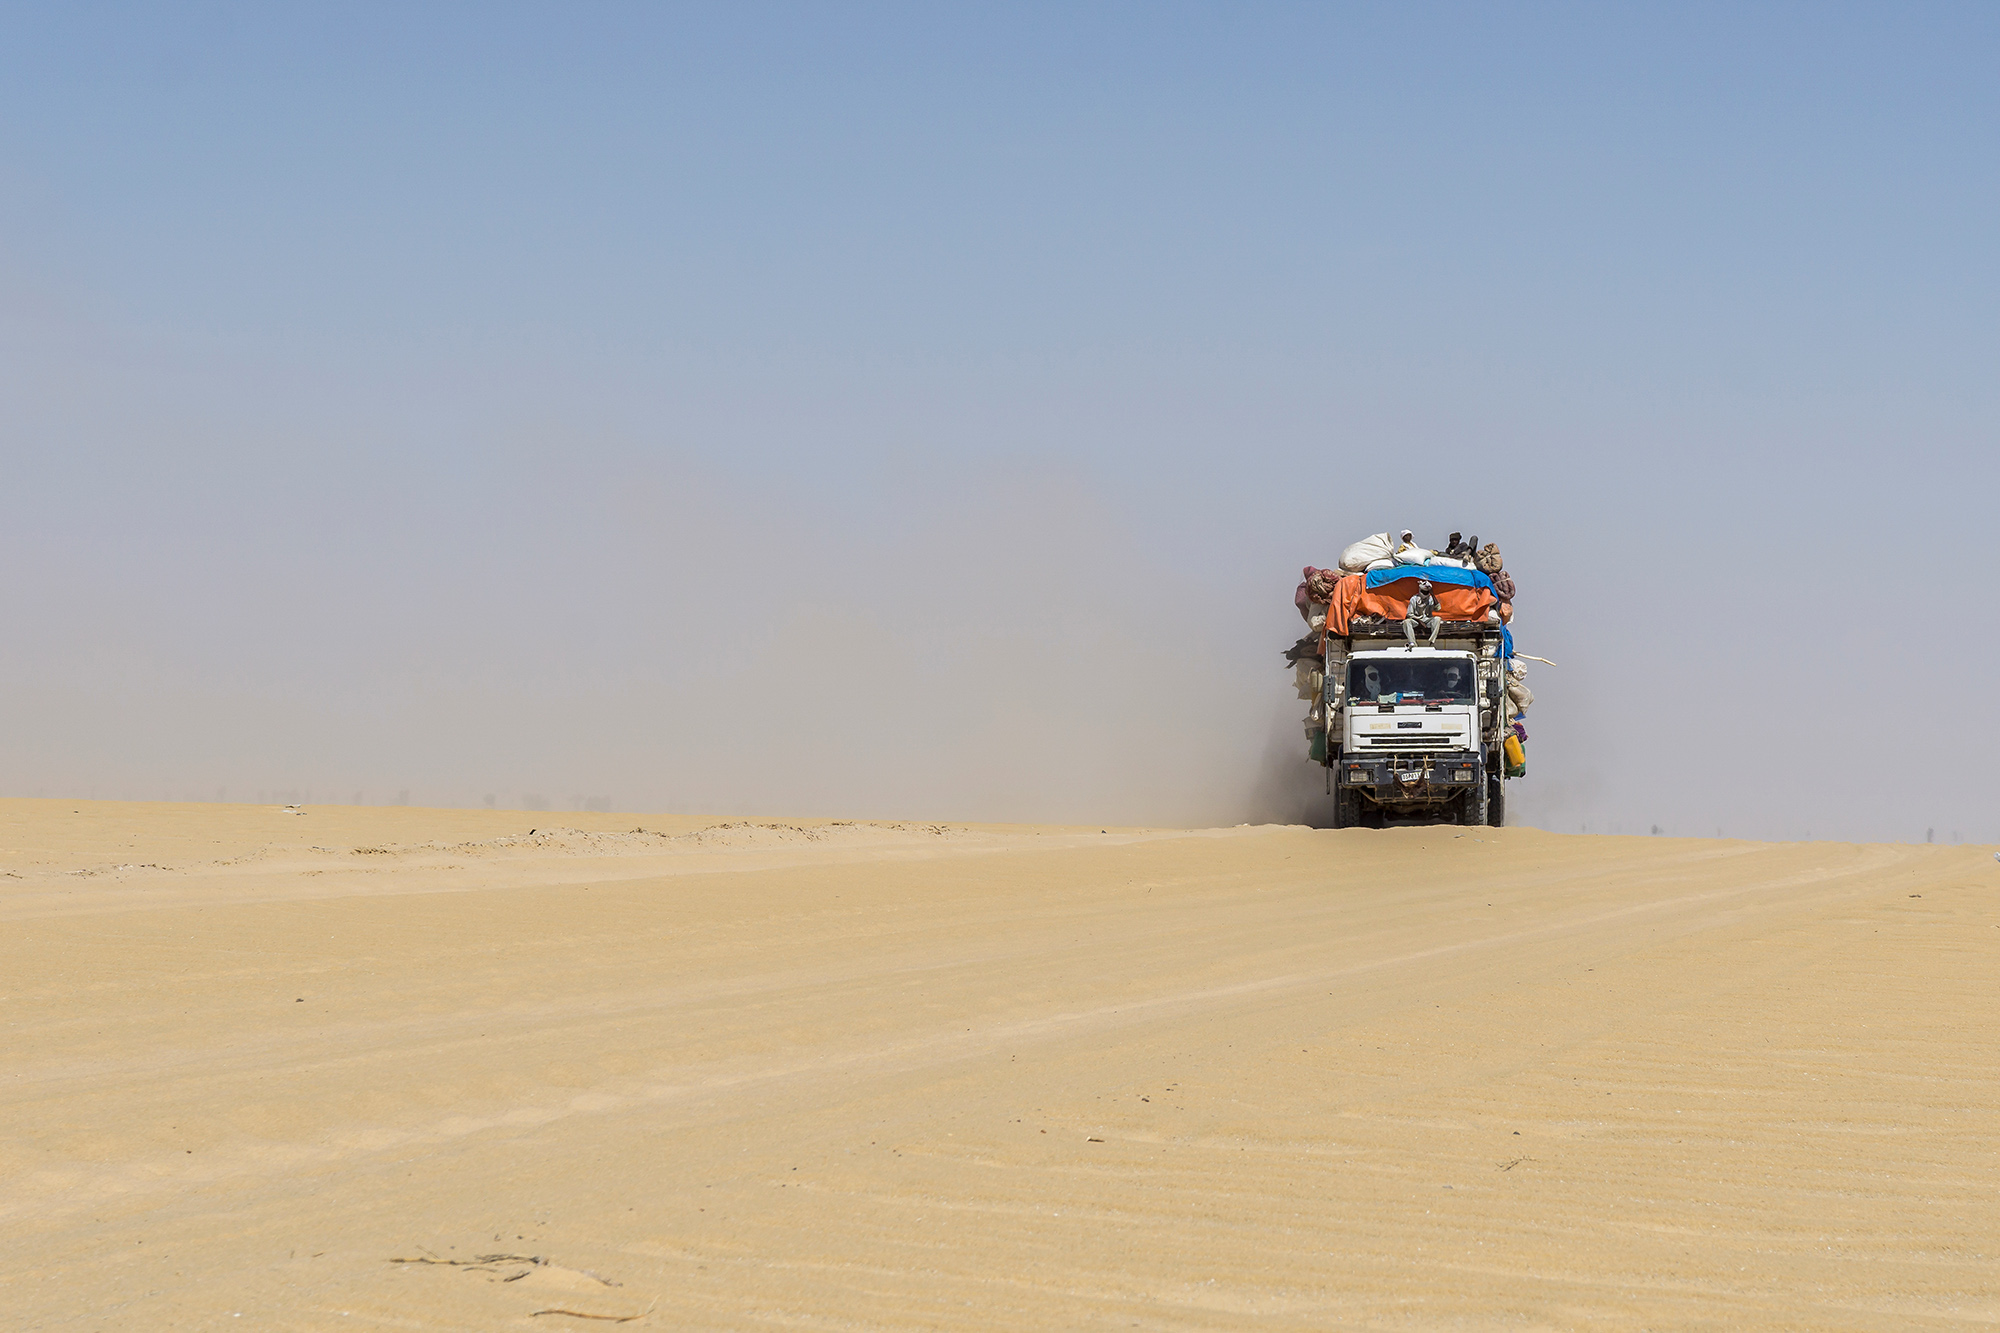 Heavily loaded truck transporting goods and people in the Sahara Desert, Chad.